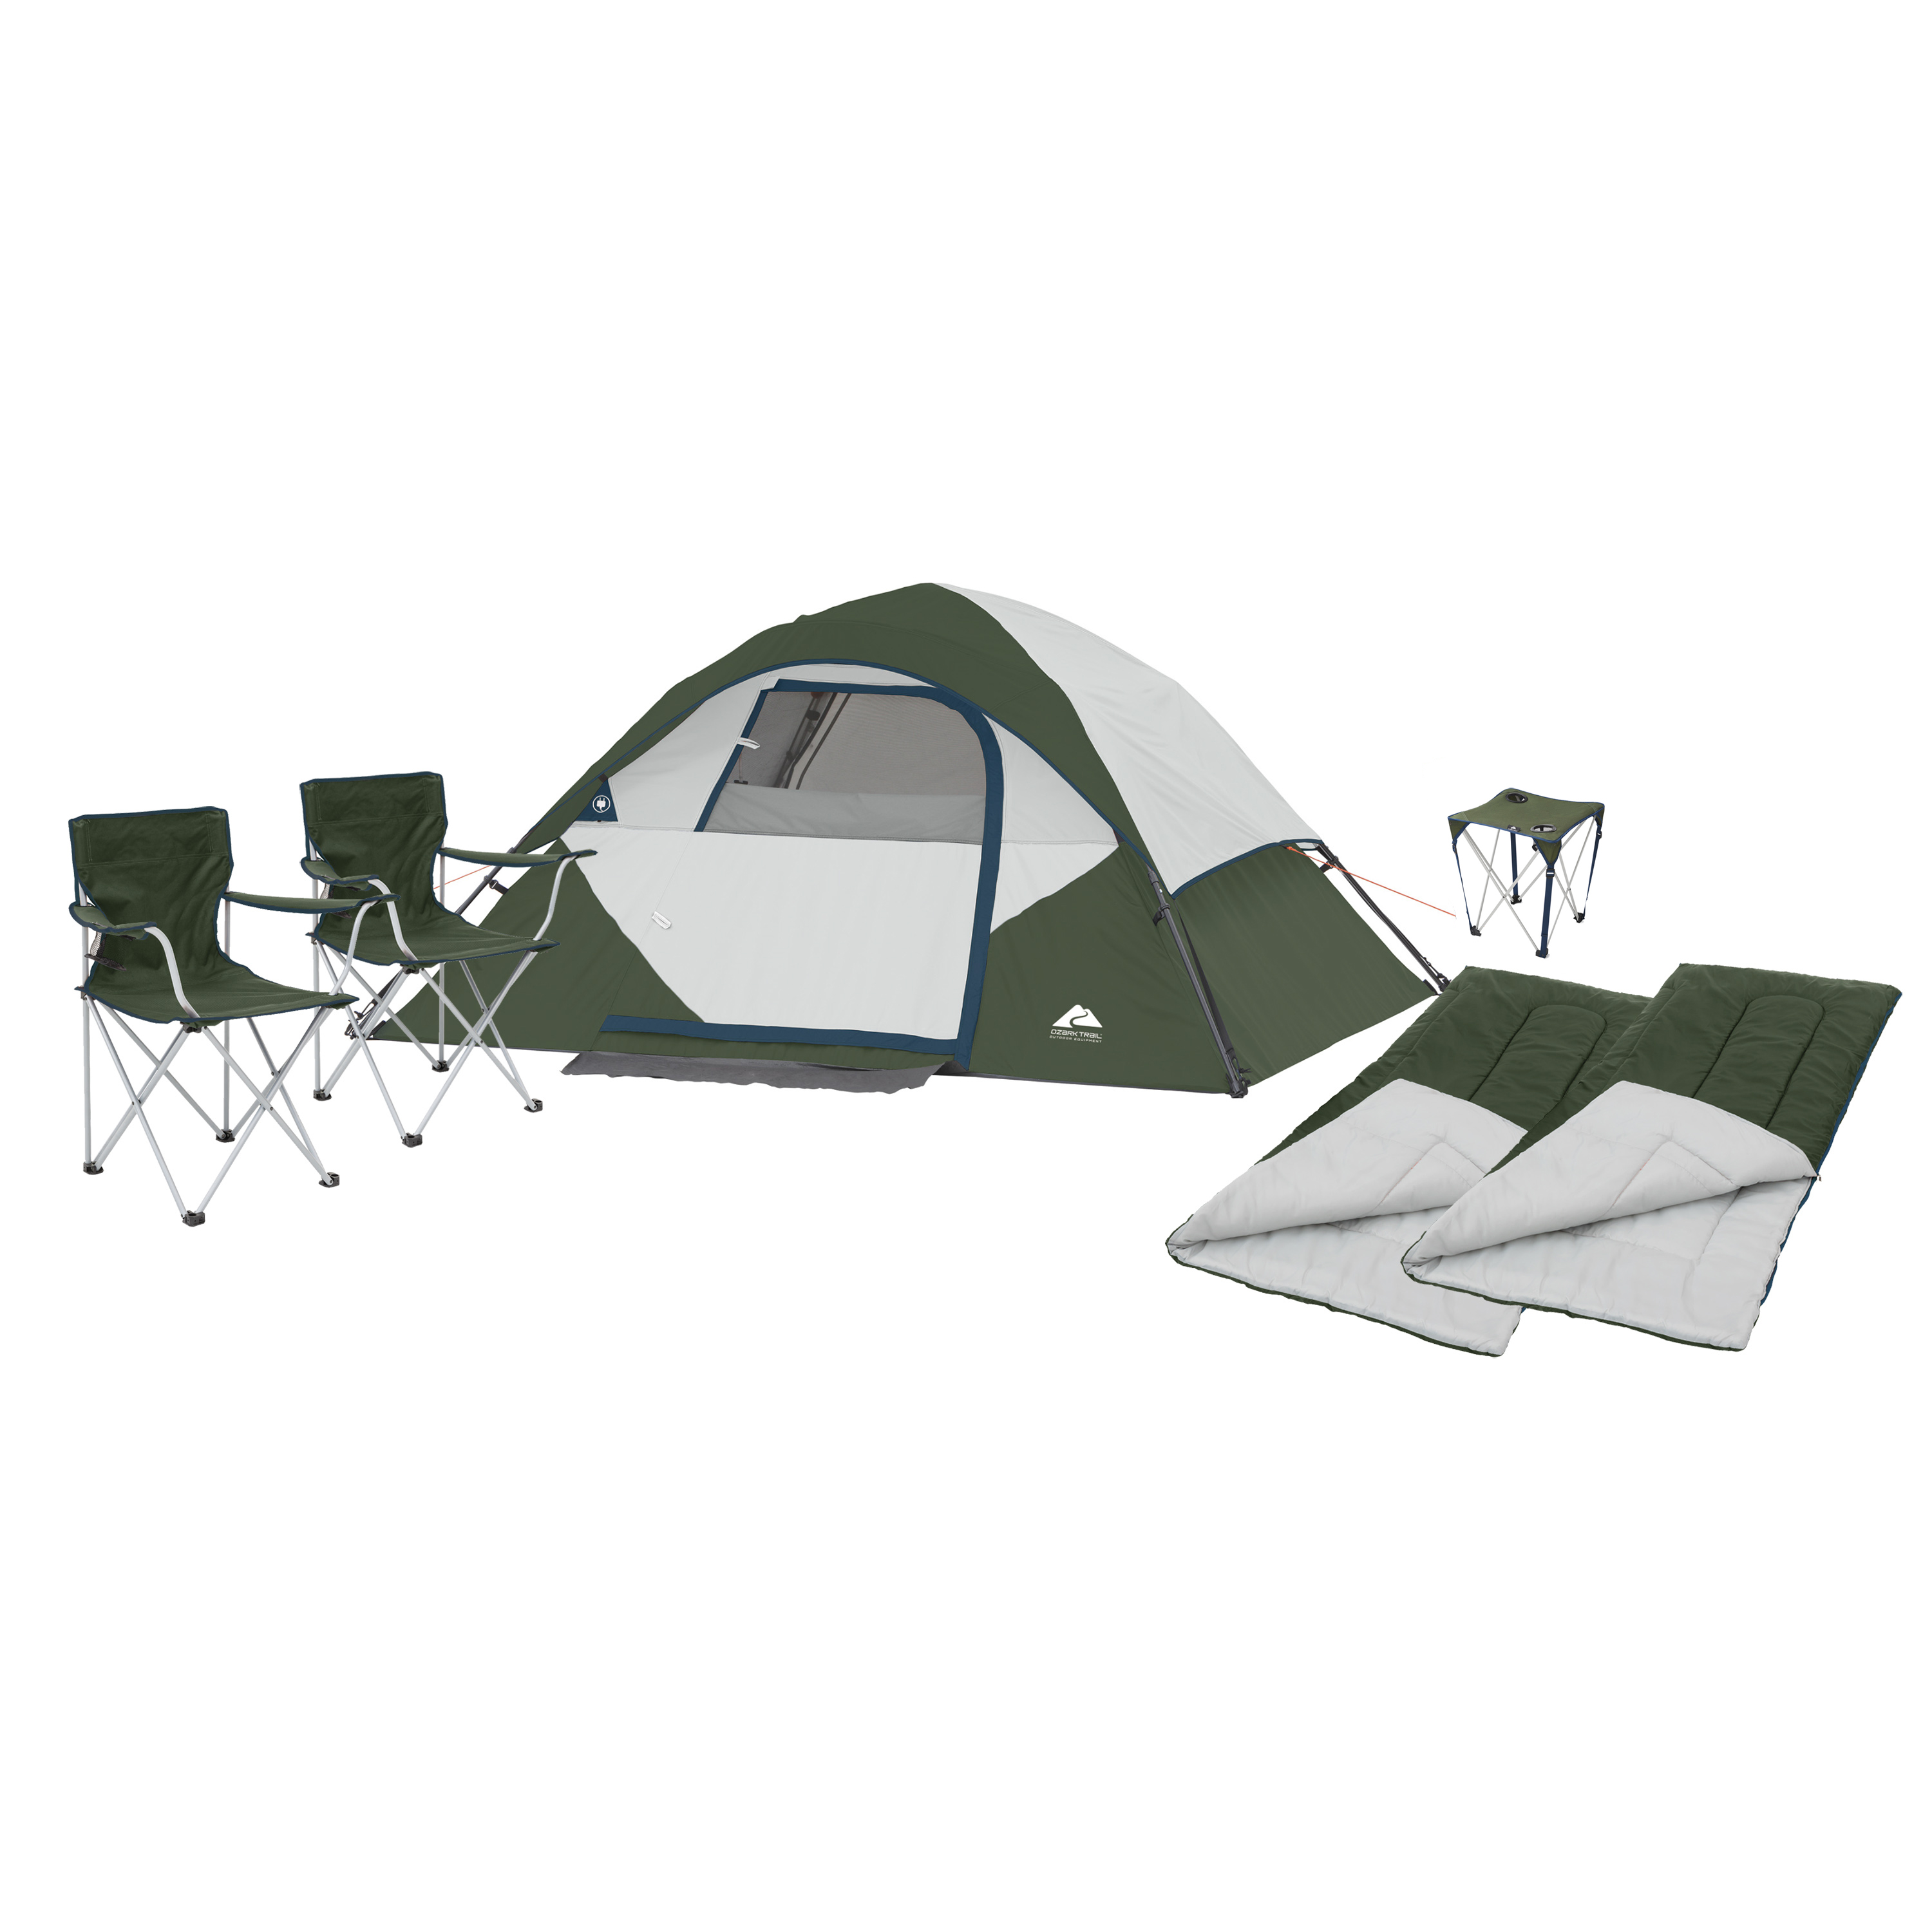 Ozark Trail 6-Piece Camping Combo -Green (Includes tent, chairs, sleeping bags, and table) - image 1 of 8